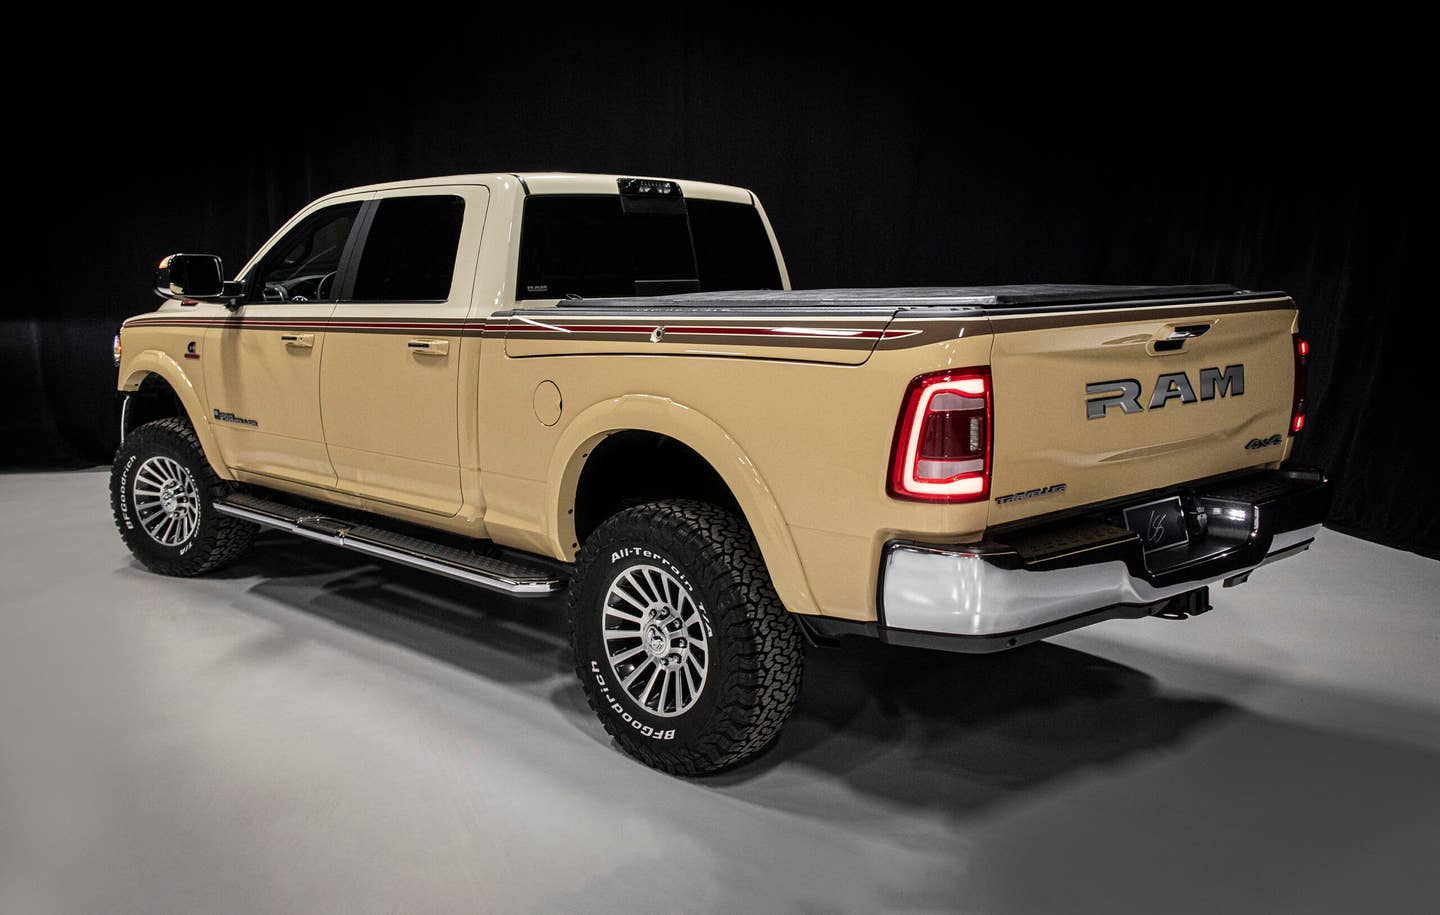 The Ram Truck brand and Chris Stapleton create one-of-a-kind Ram “Traveller” truck designed by the eight-time Grammy-winning artist in collaboration with the Ram Truck design team